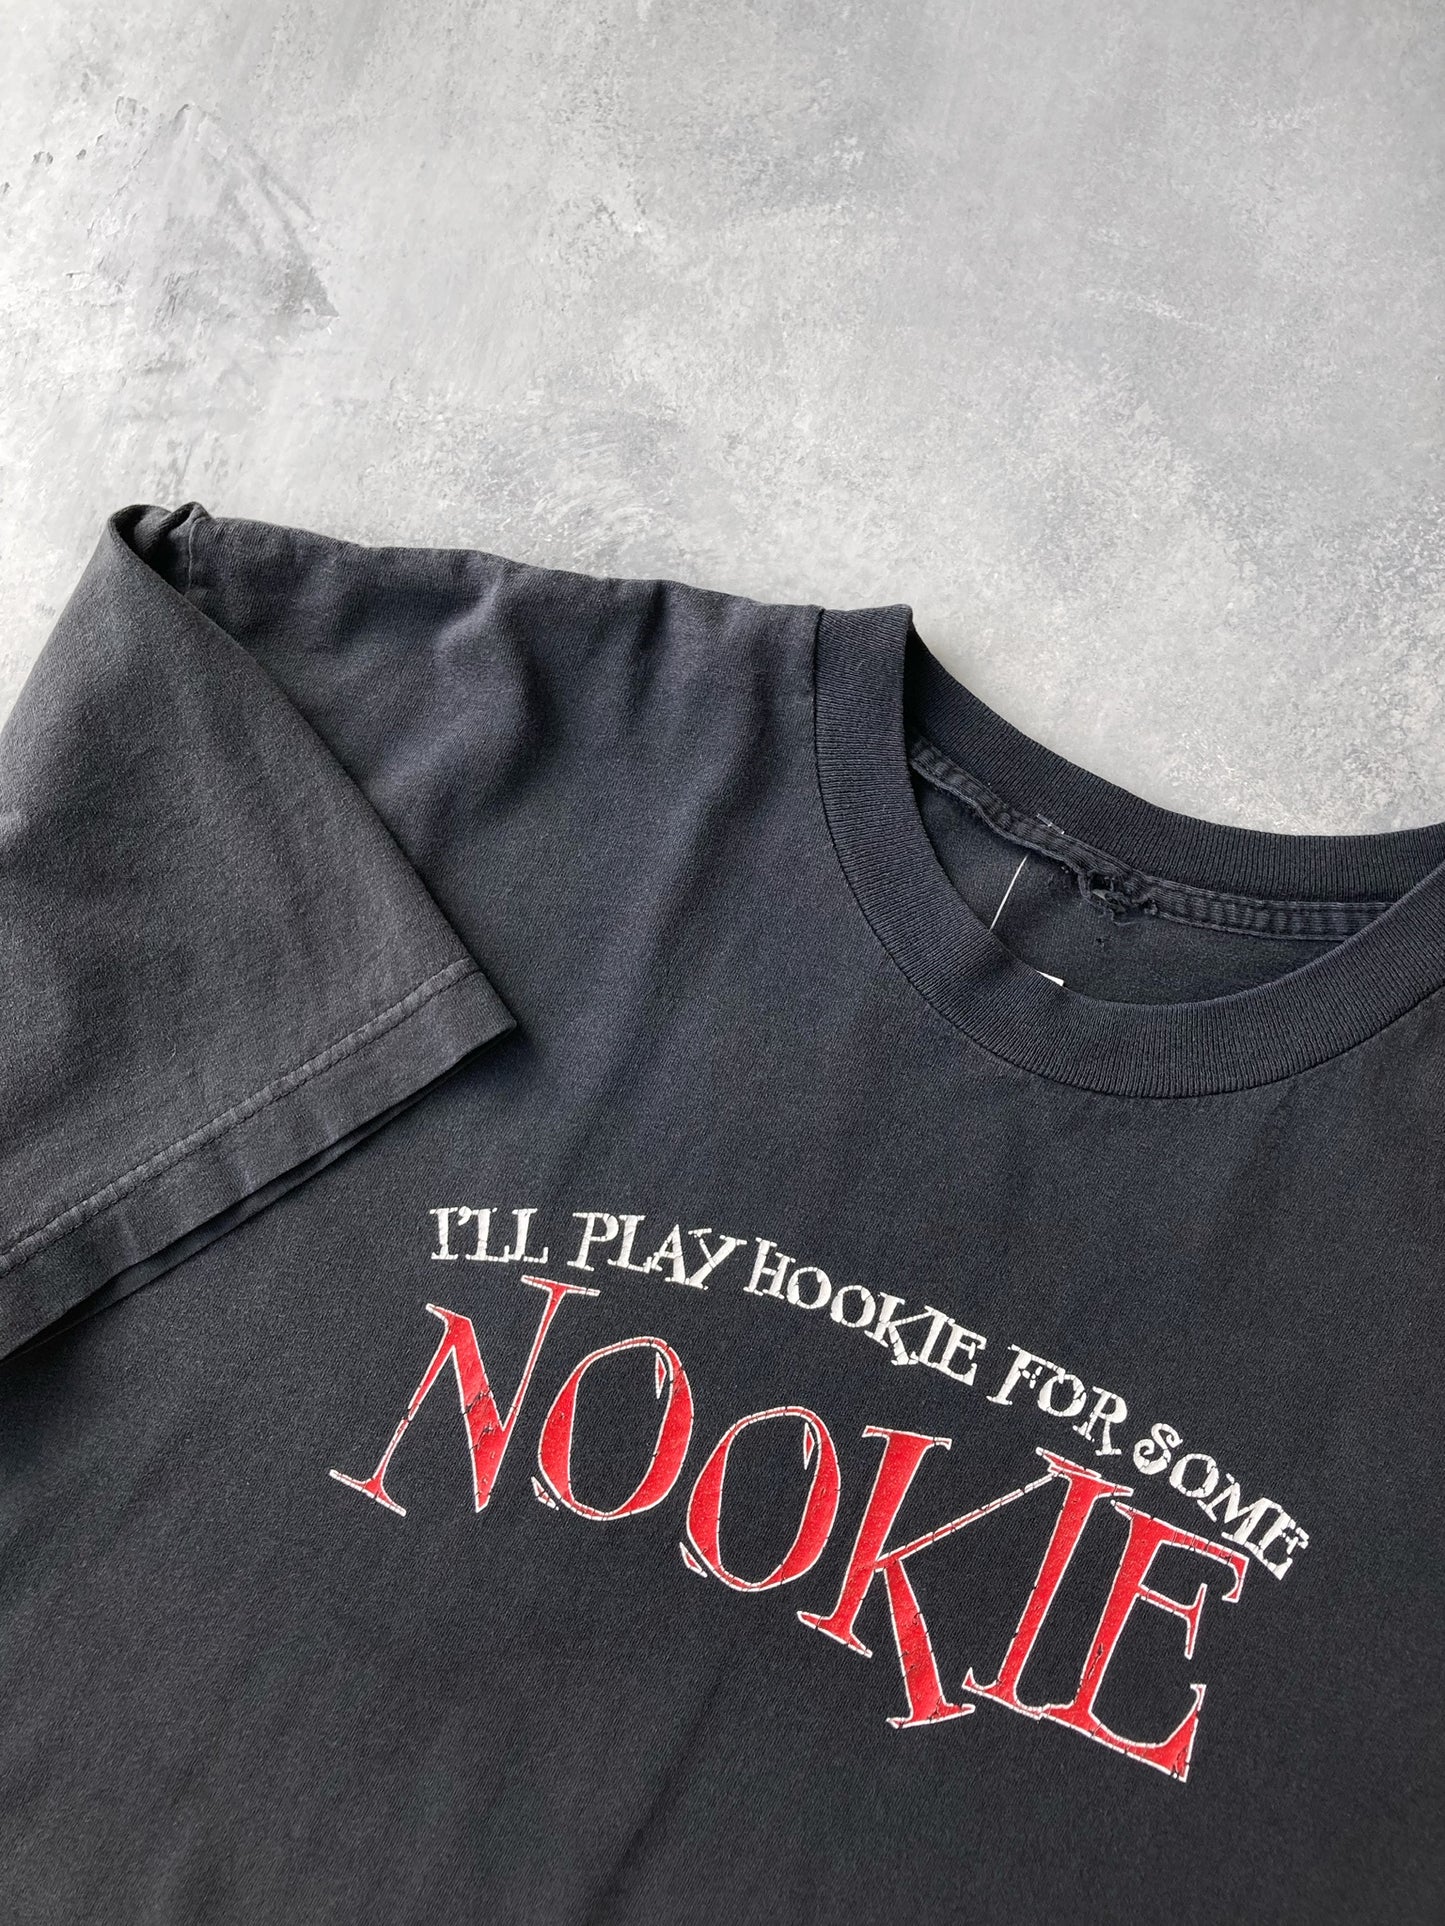 Hookie for some Nookie T-Shirt 00's - XL